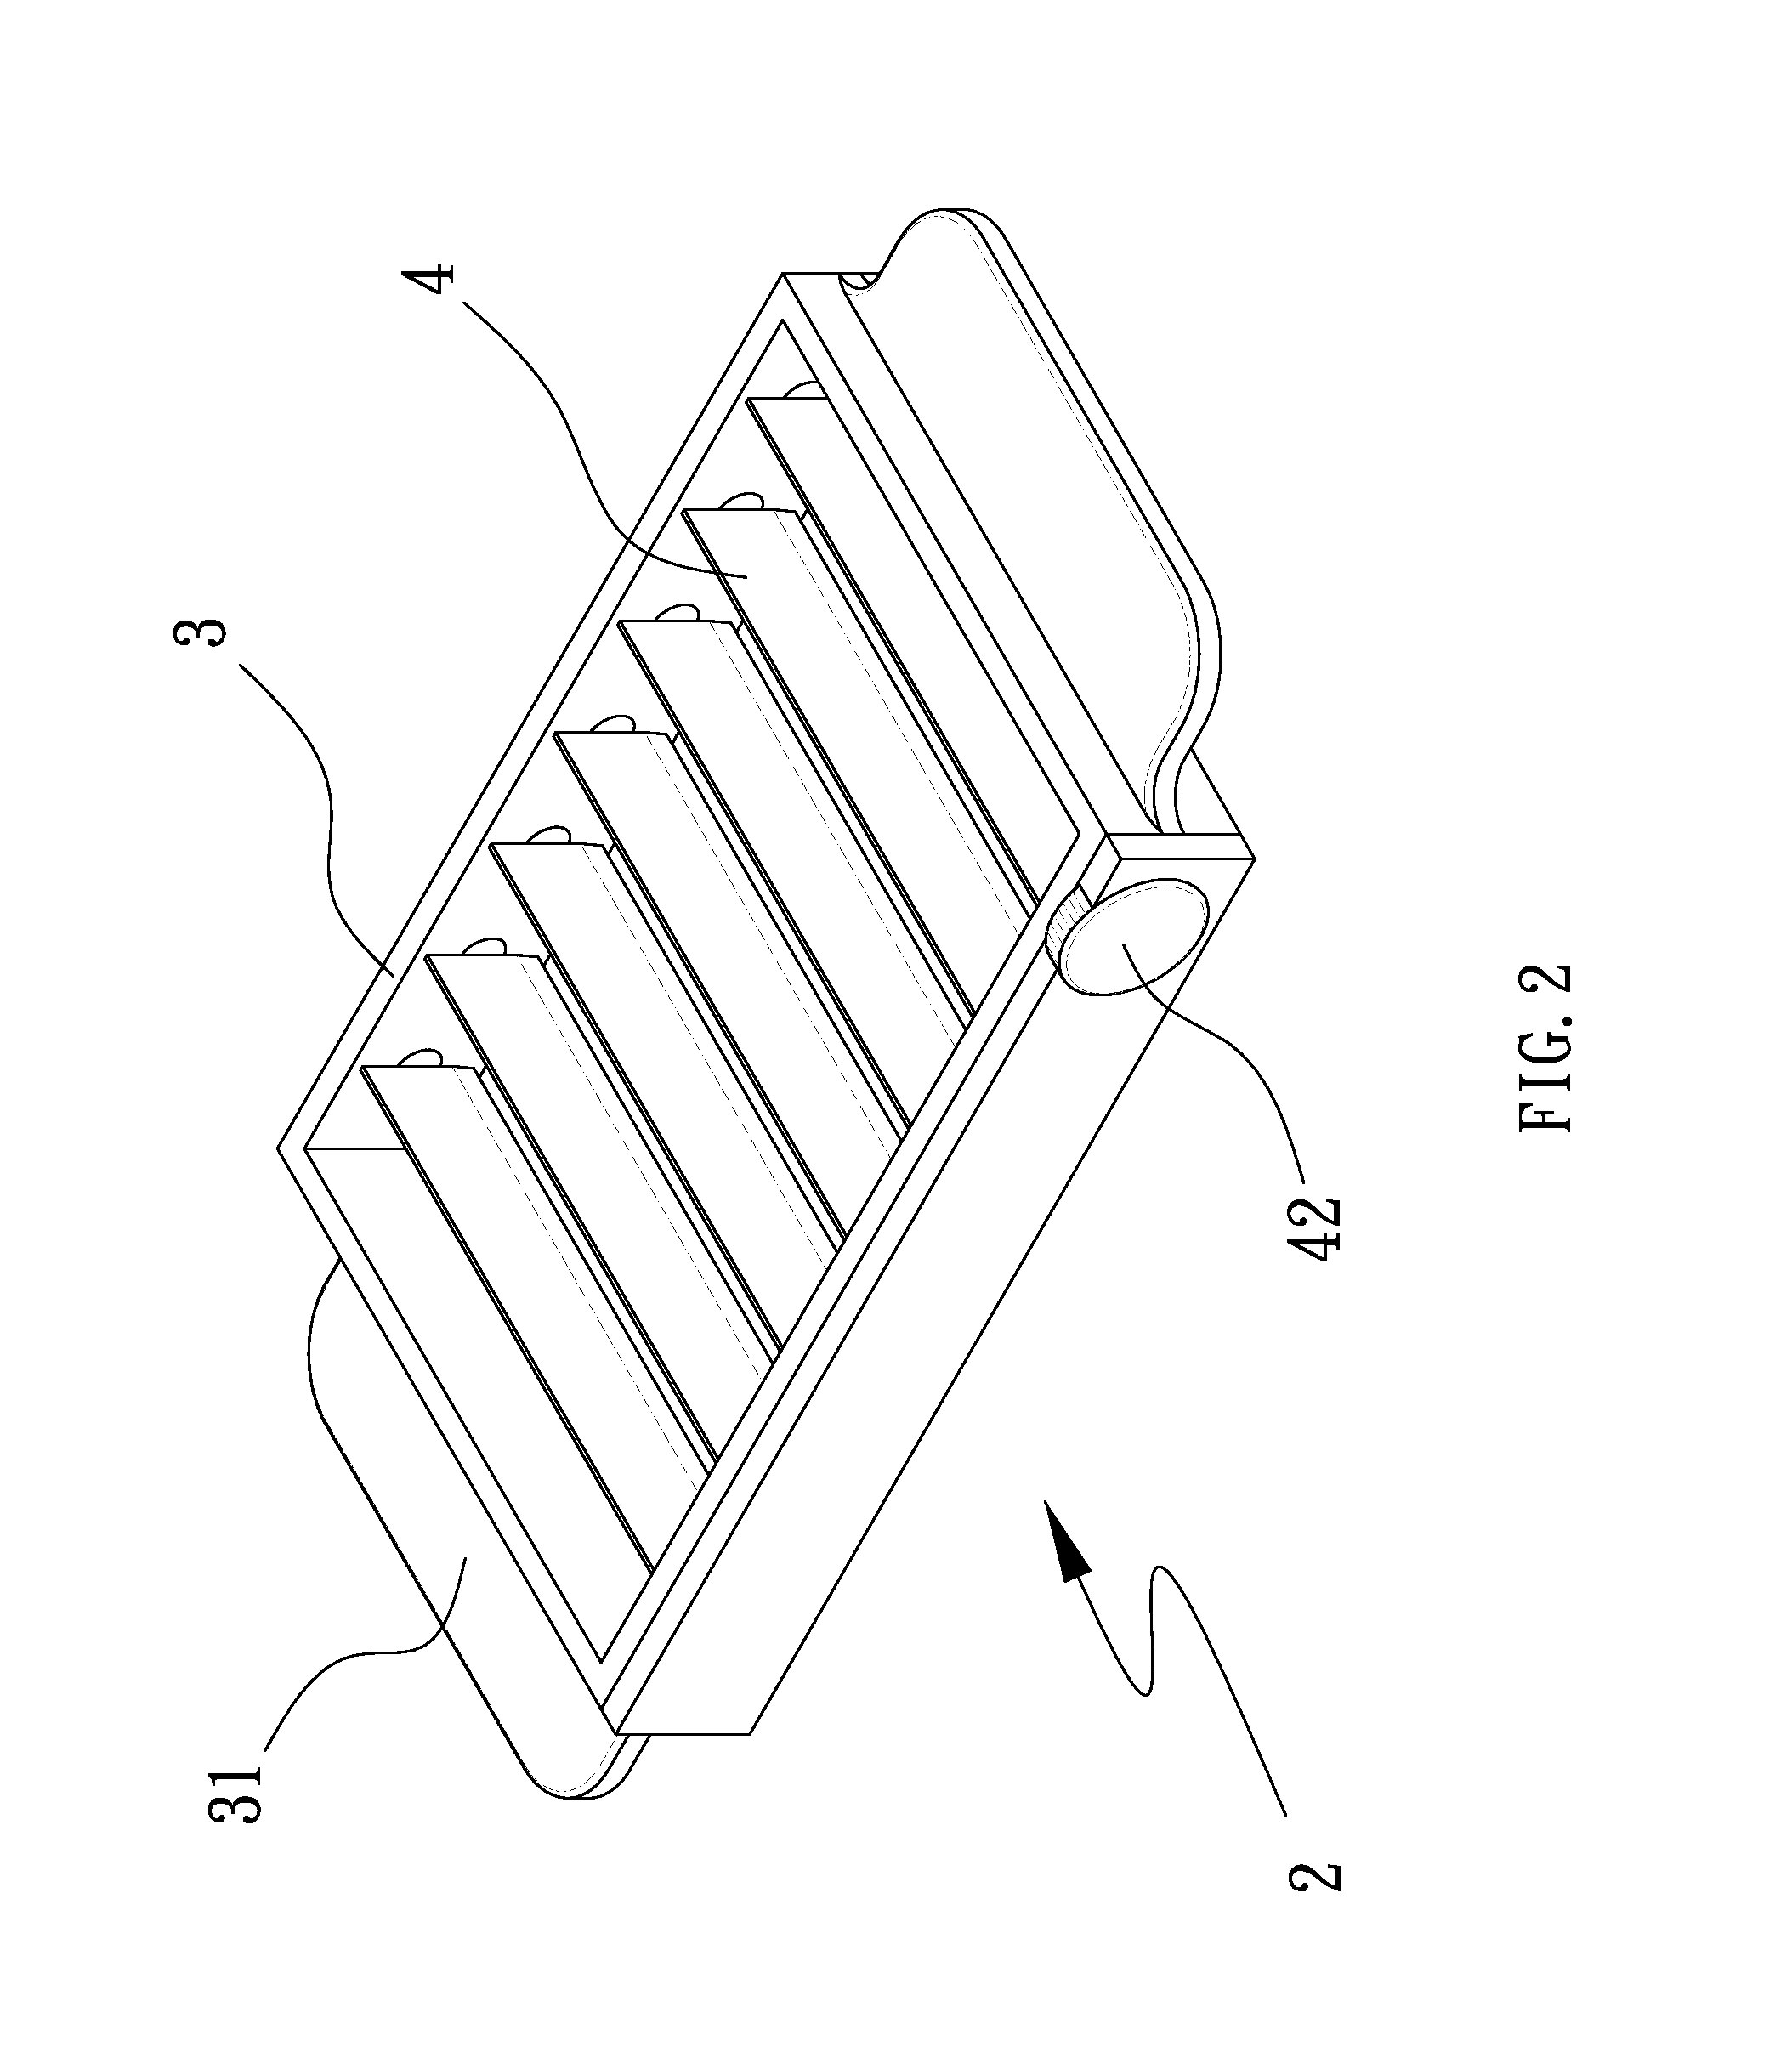 Fruit and vegetables slicing apparatus structure